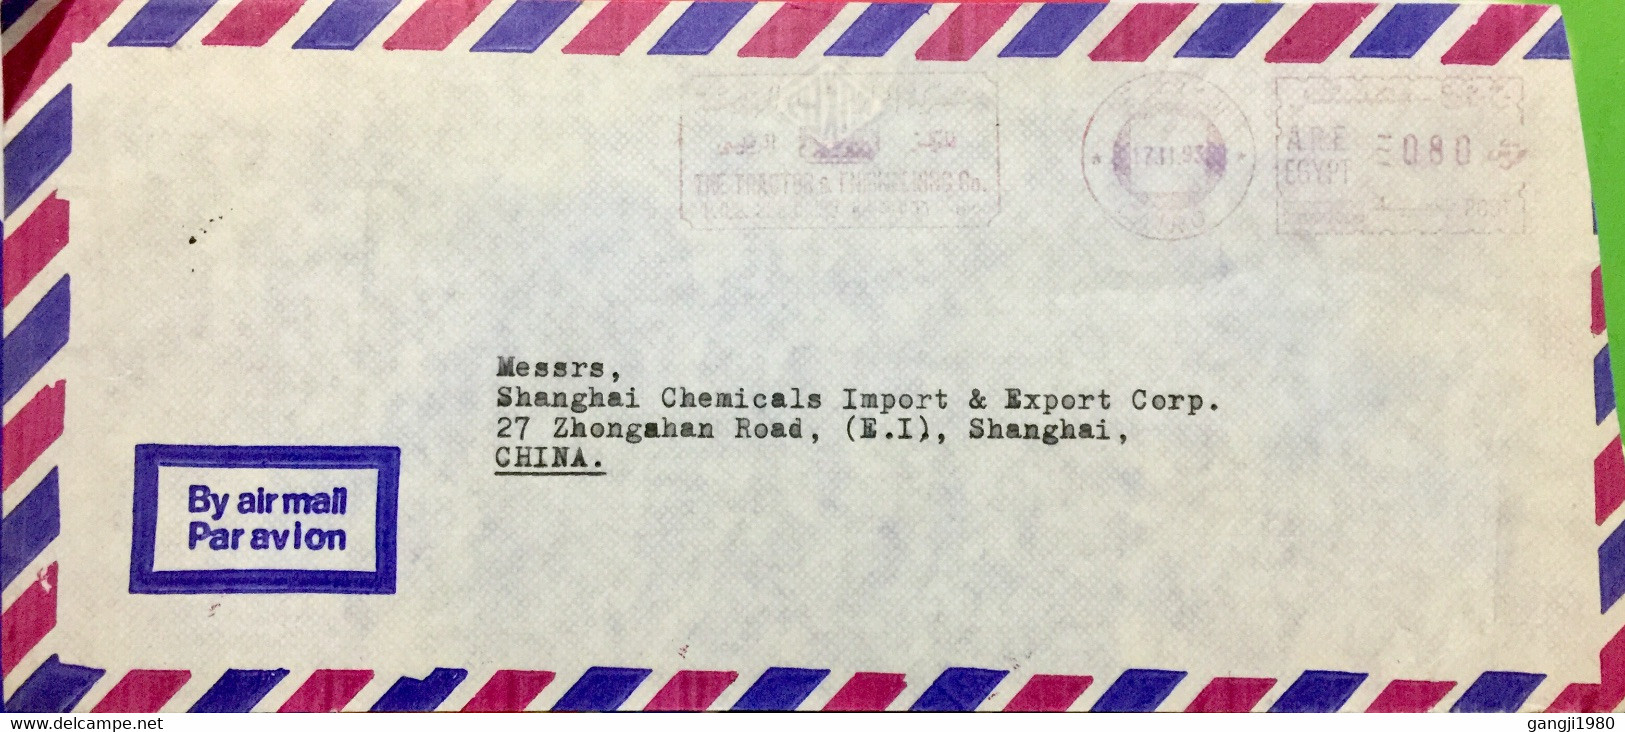 EGYPT 1993, AIRMAIL COVER USED TO CHINA, METER CANCEL, ADVERTISING THE TRACTOR & ENGINEERING COMPANY - Cartas & Documentos